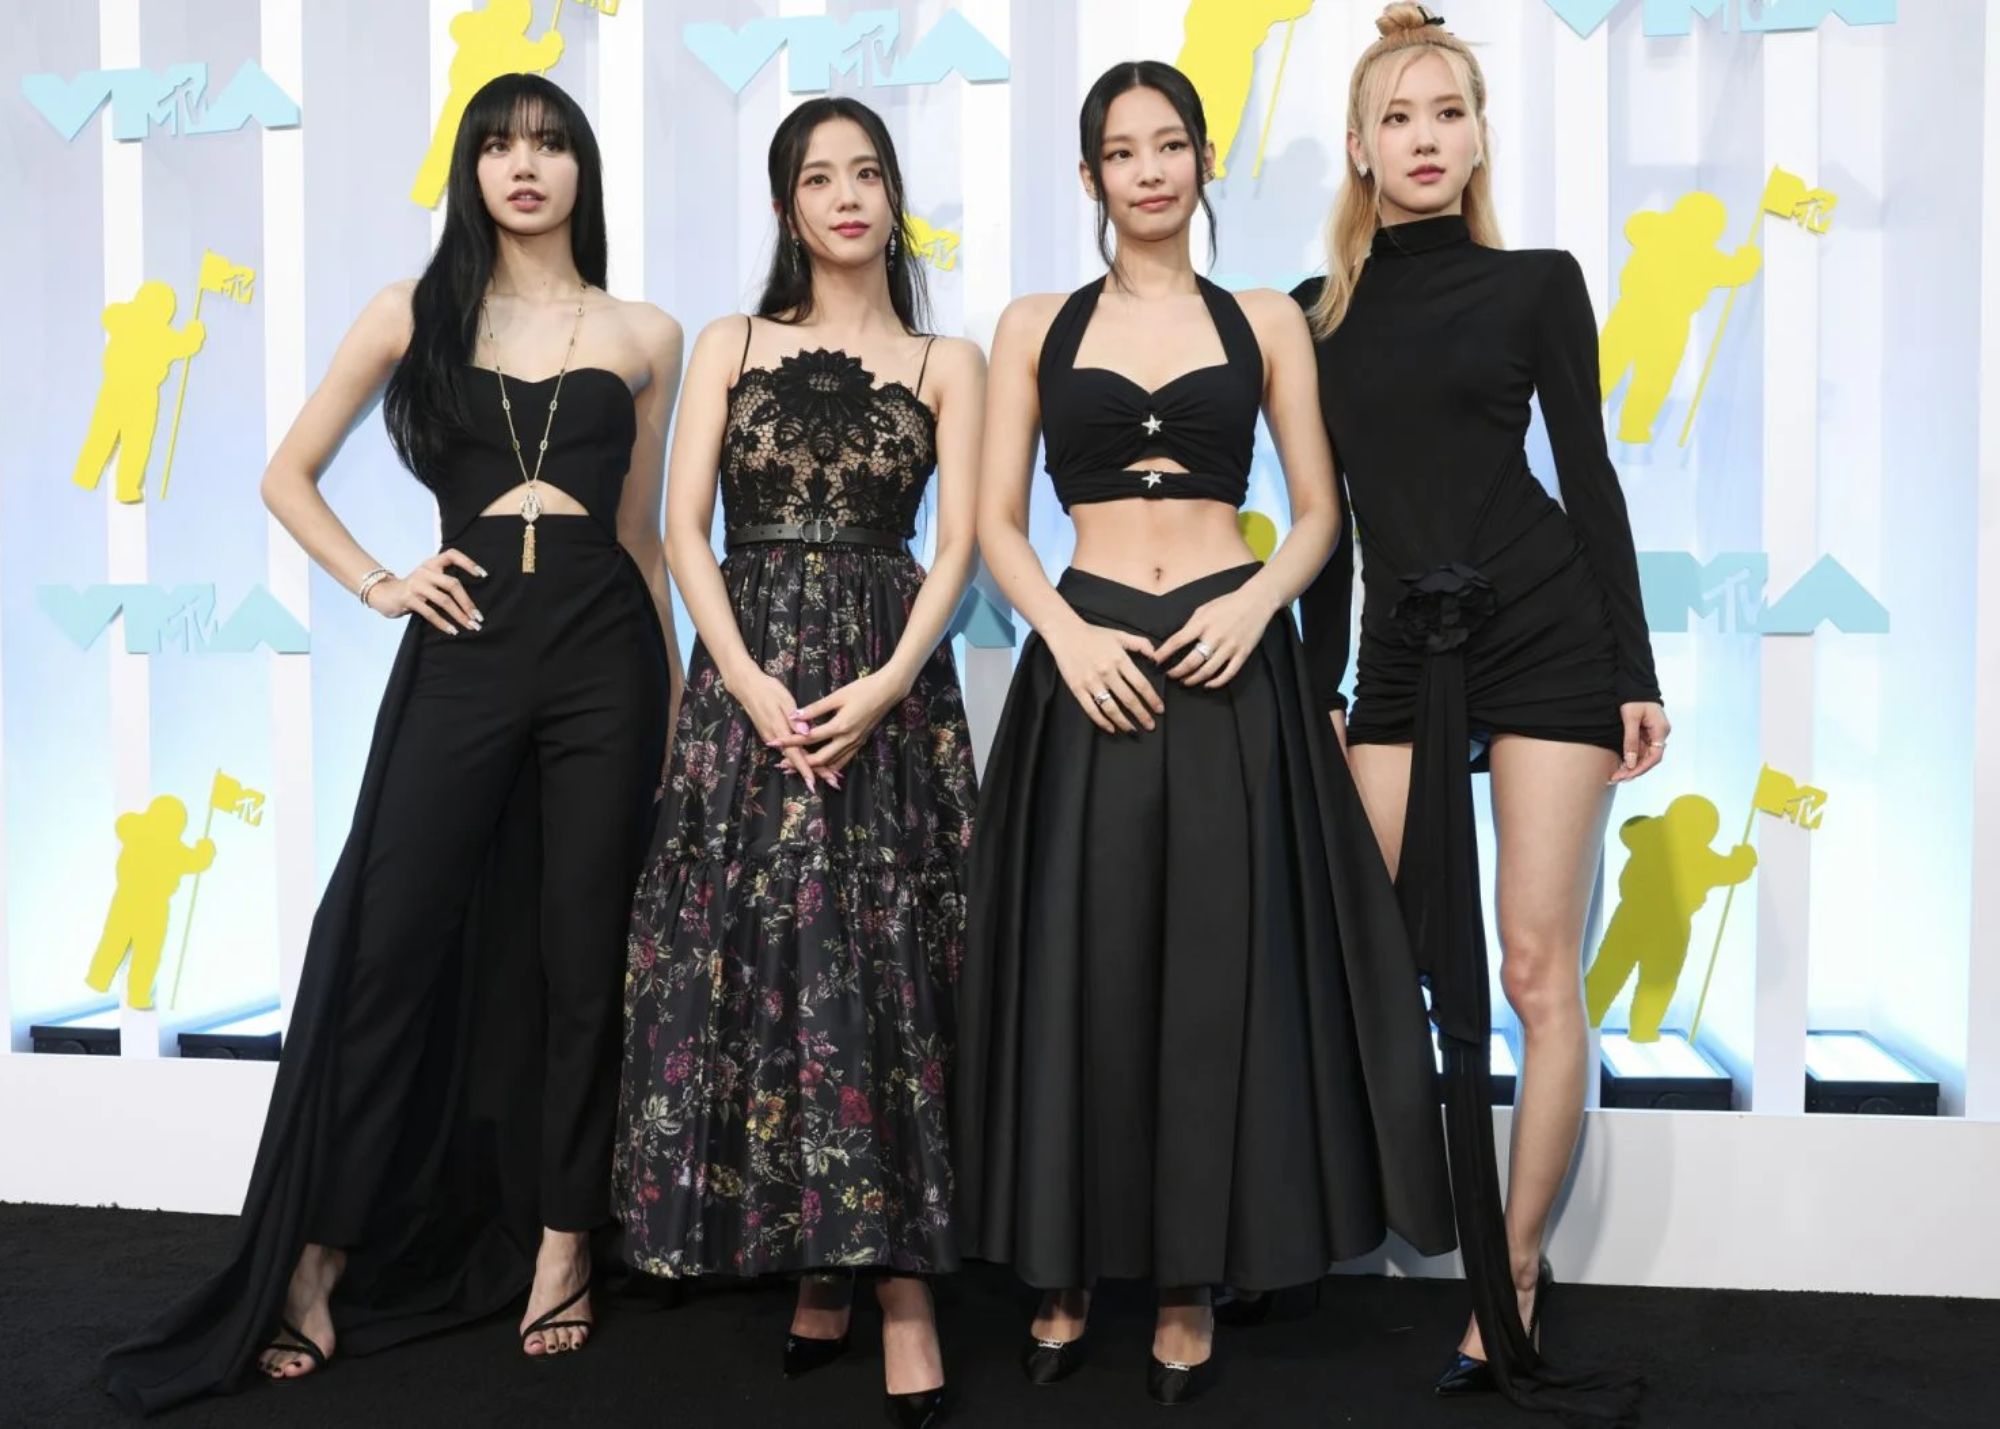 Blackpink wears all black-colored outfit with each member wearing pieces from their respective brands